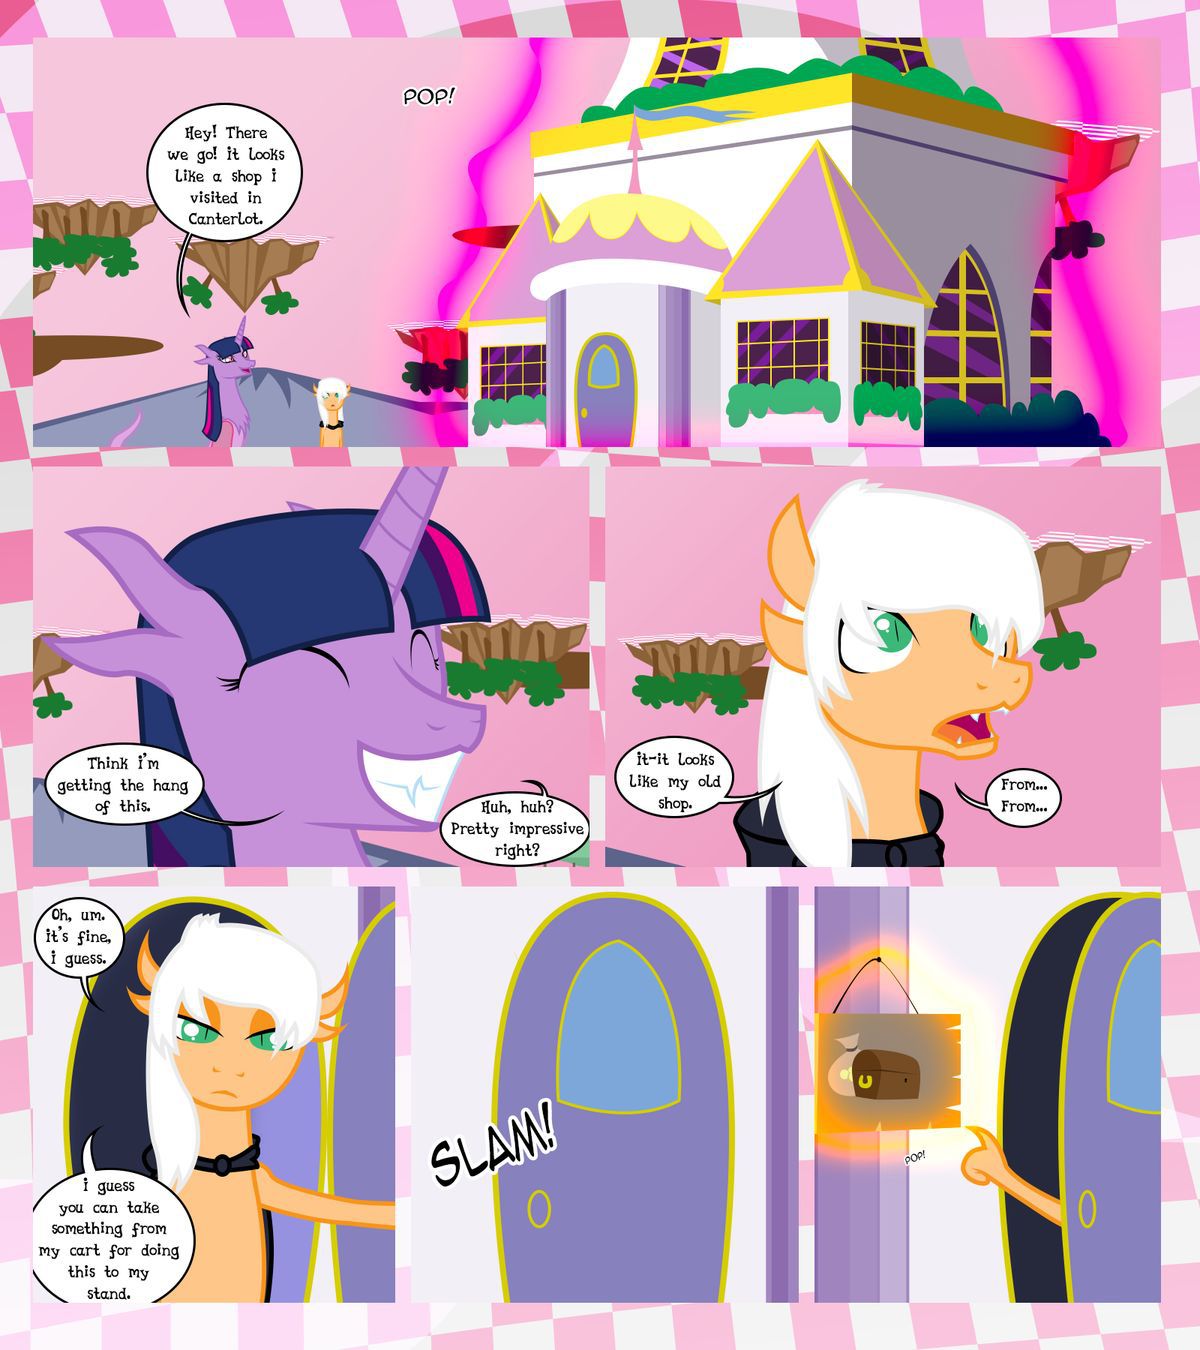 [GatesMcCloud] Cutie Mark Crusaders 10k: Chapter 3 - The Lost (My Little Pony: Friendship is Magic) [English] [Ongoing] 38